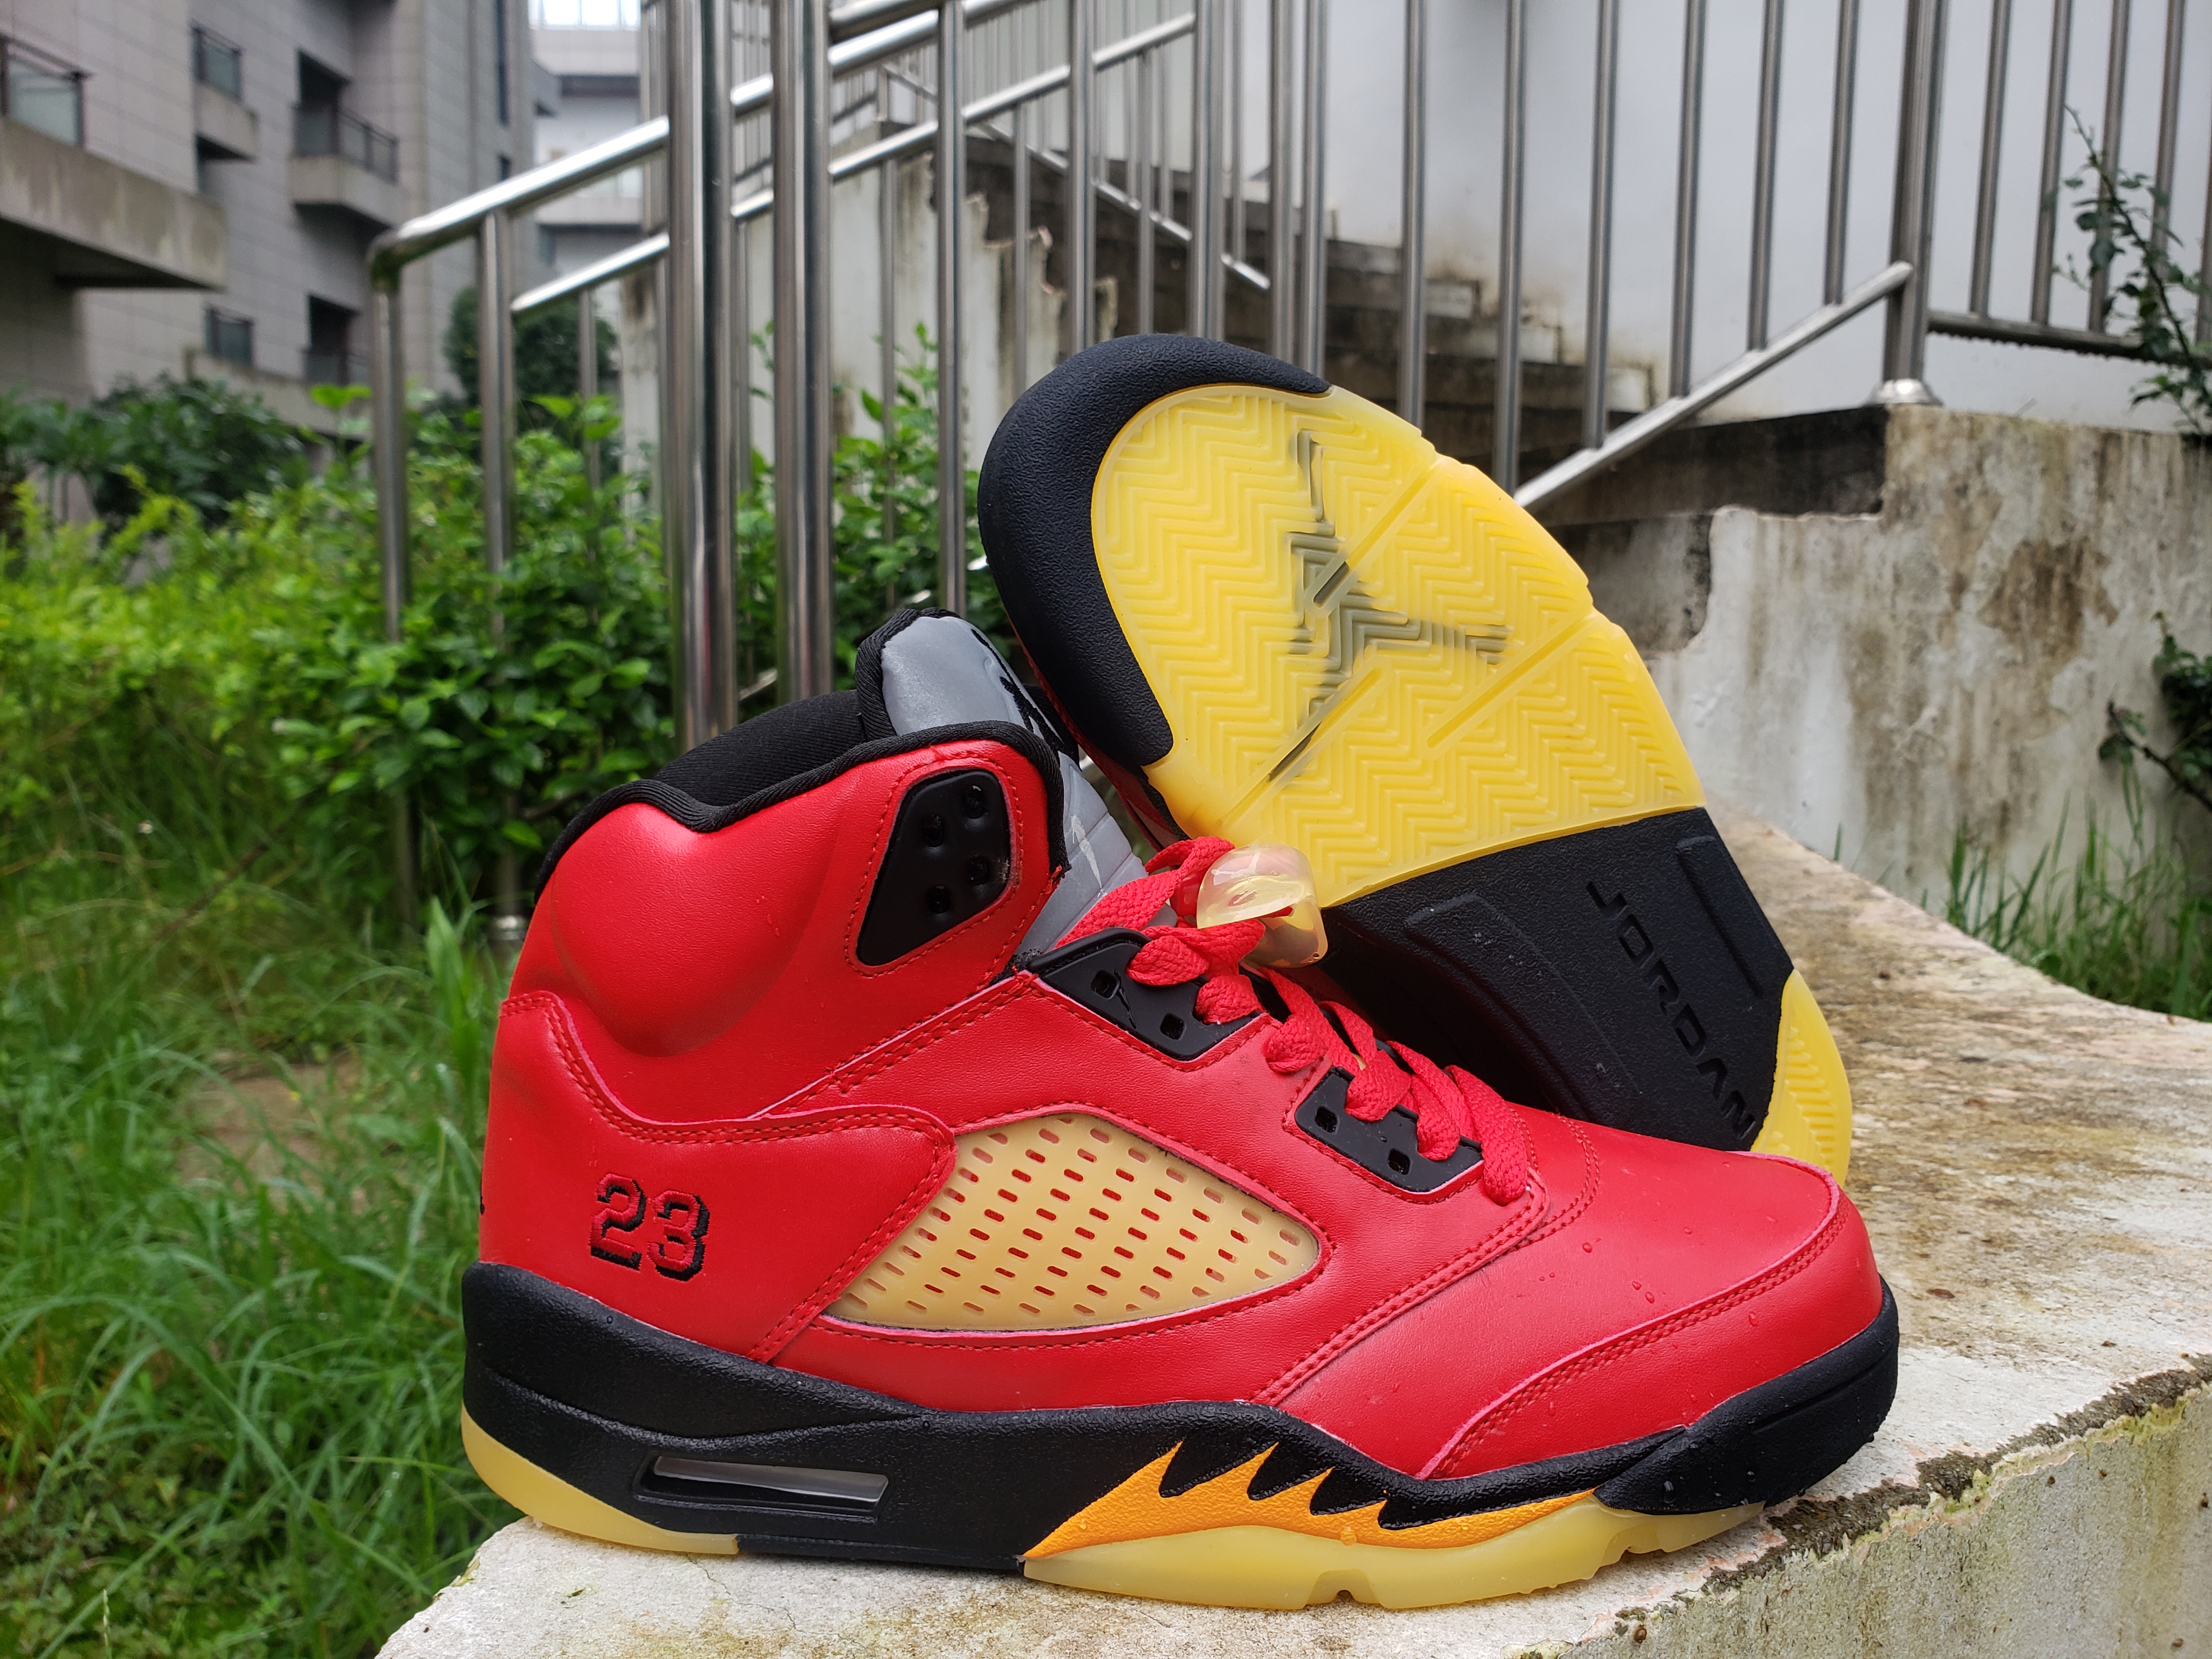 New 2022 Air Jordan 5 Chicago Red Yellow Black Shoes